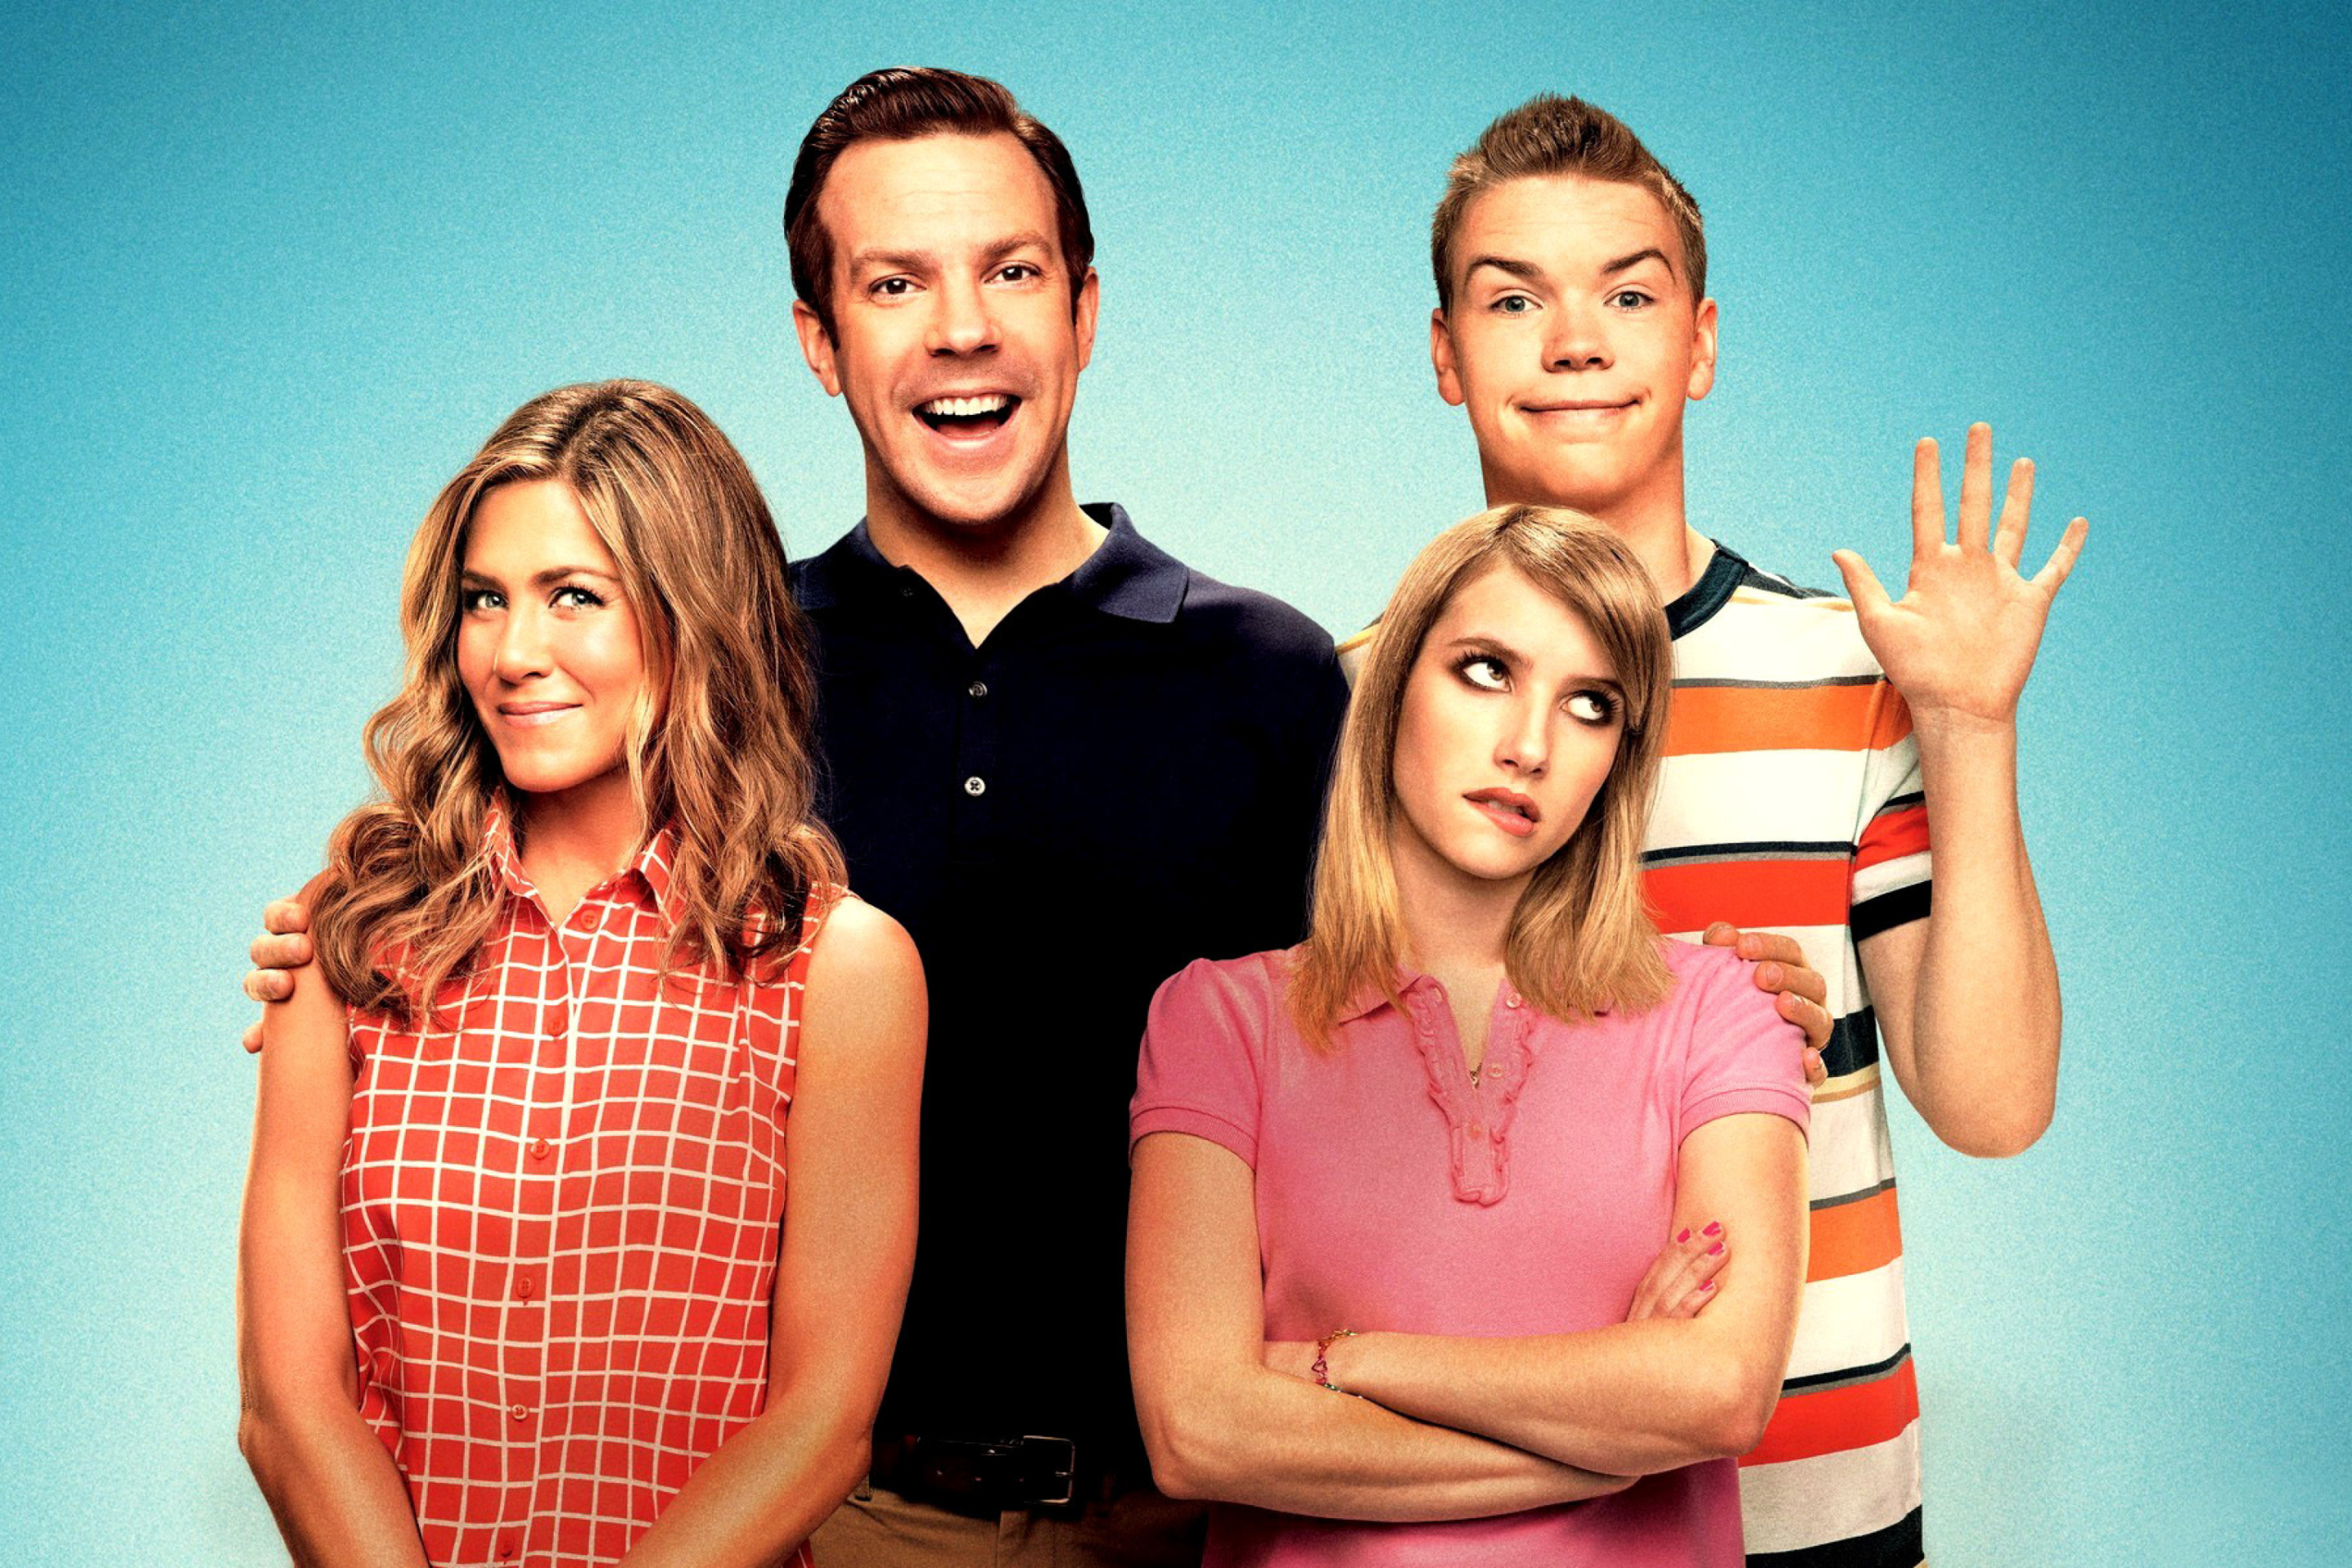 We are the Millers screenshot #1 2880x1920